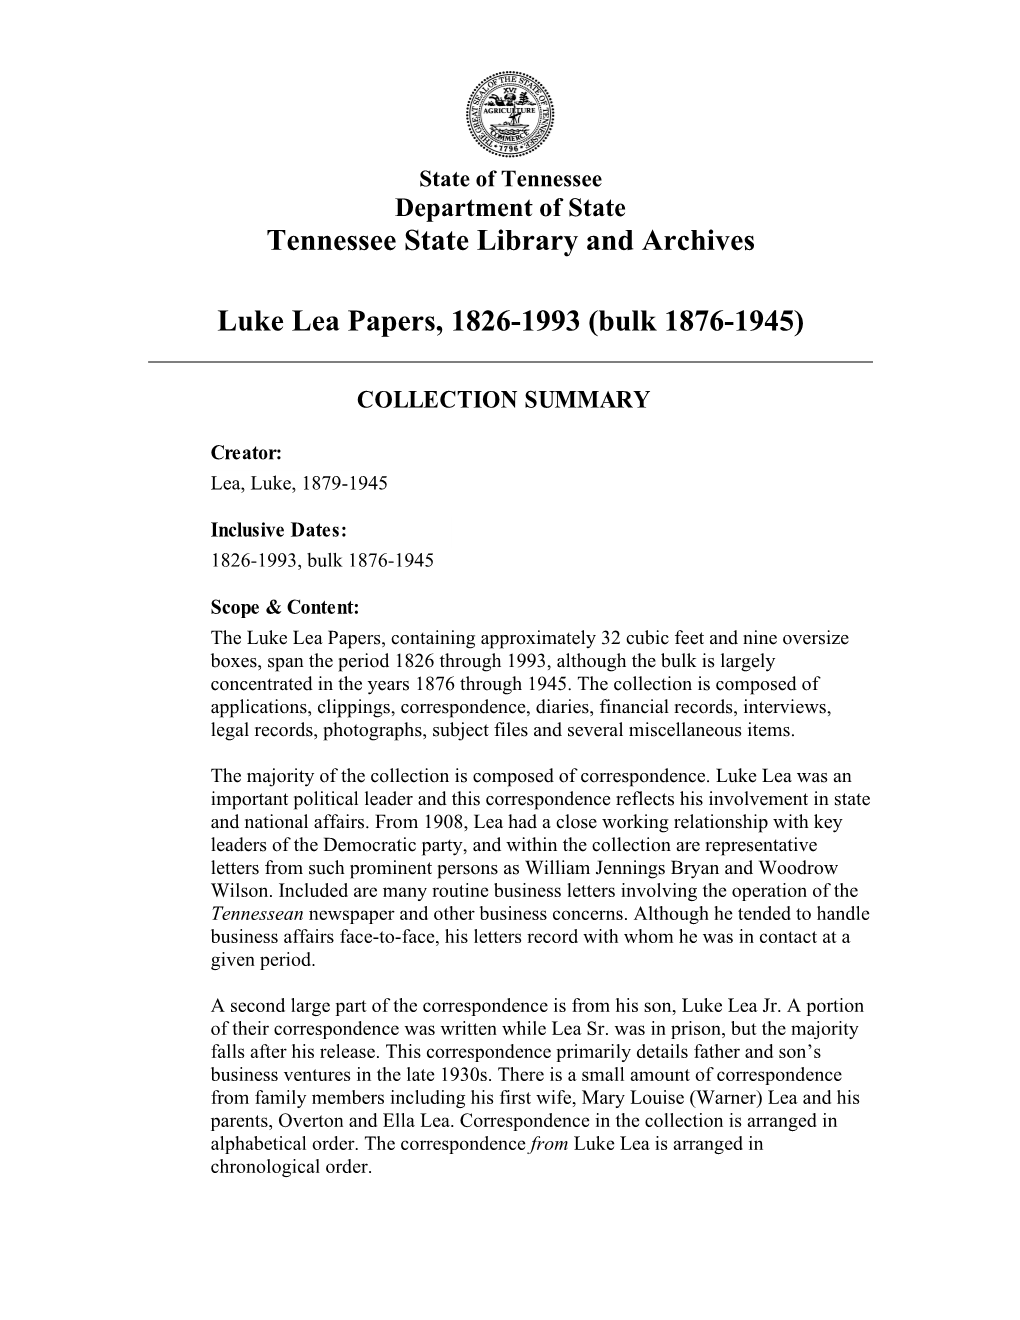 Tennessee State Library and Archives Luke Lea Papers, 1826-1993 (Bulk 1876-1945)